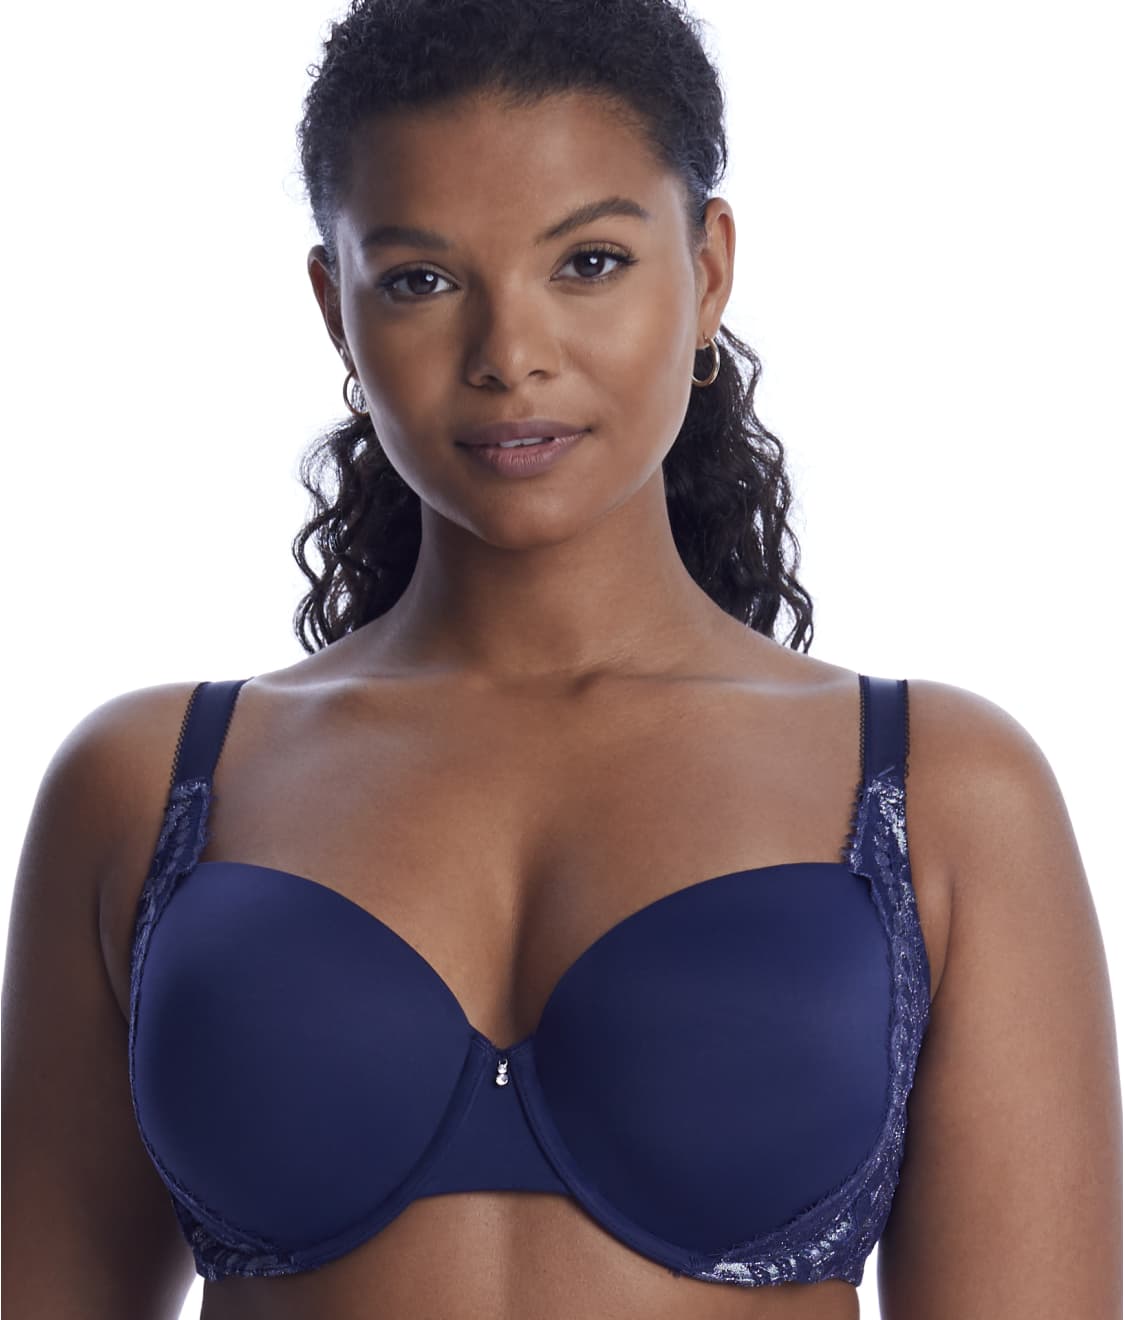 What are the different bra styles and shapes? – City Chic